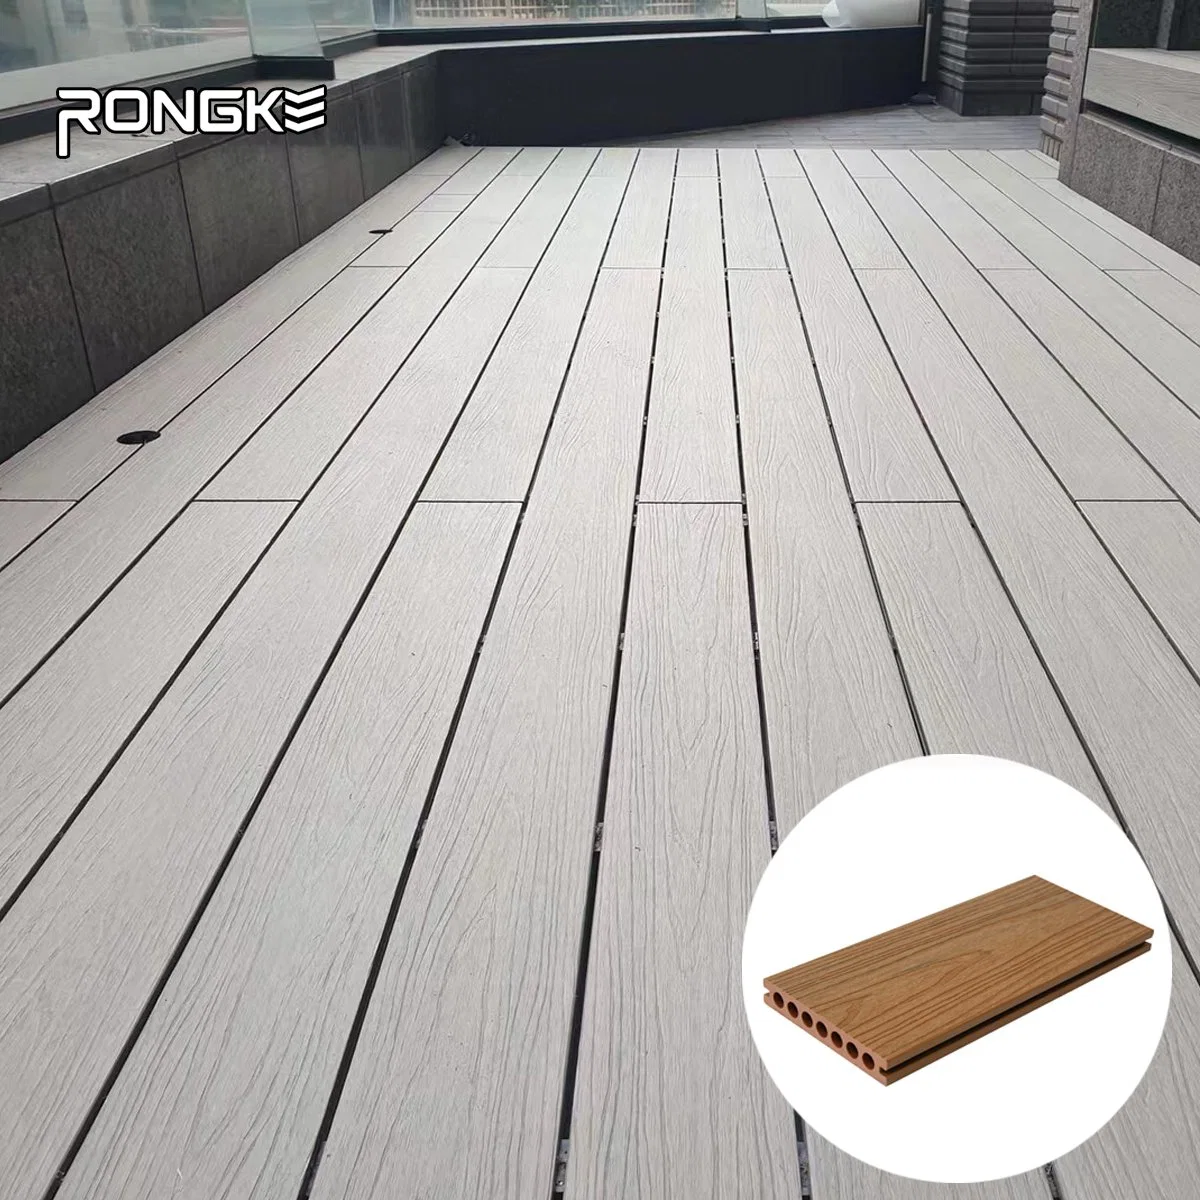 New Design Co-Extruded Wood Plastic Composite Boards Outdoor